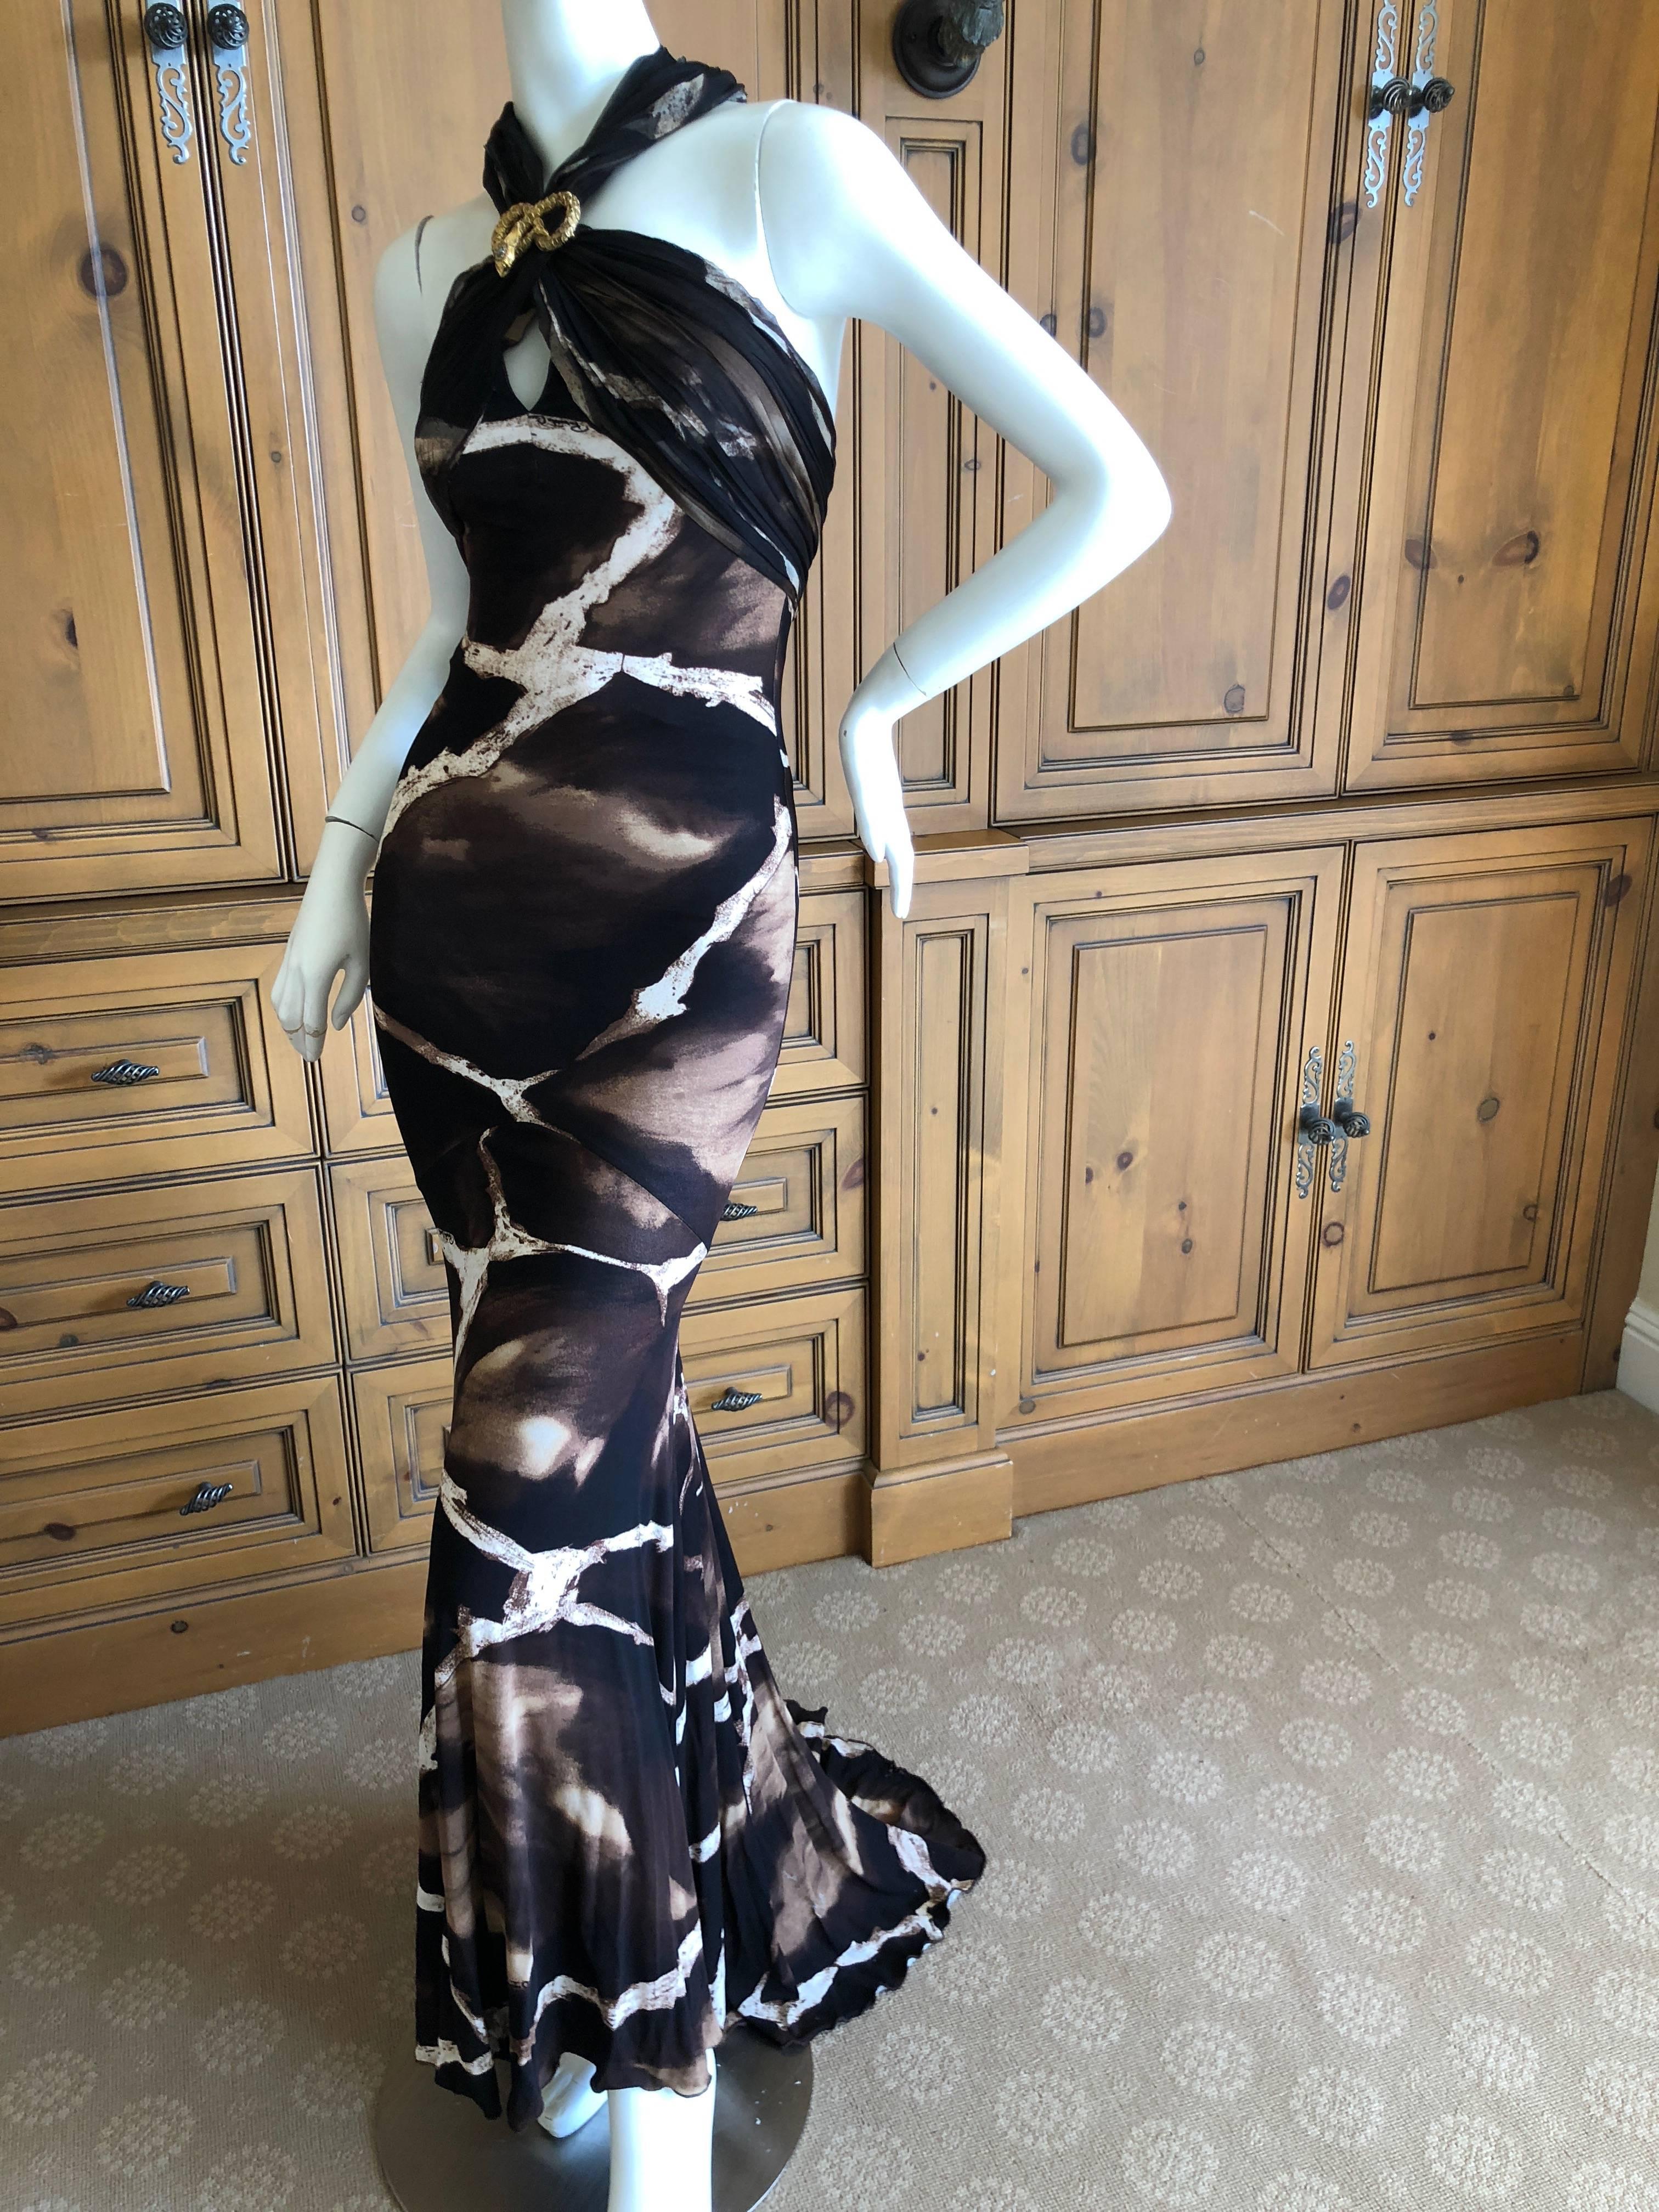 Roberto Cavalli Vintage 1980's Animal Print Evening Dress with Train and Scarf In Excellent Condition For Sale In Cloverdale, CA